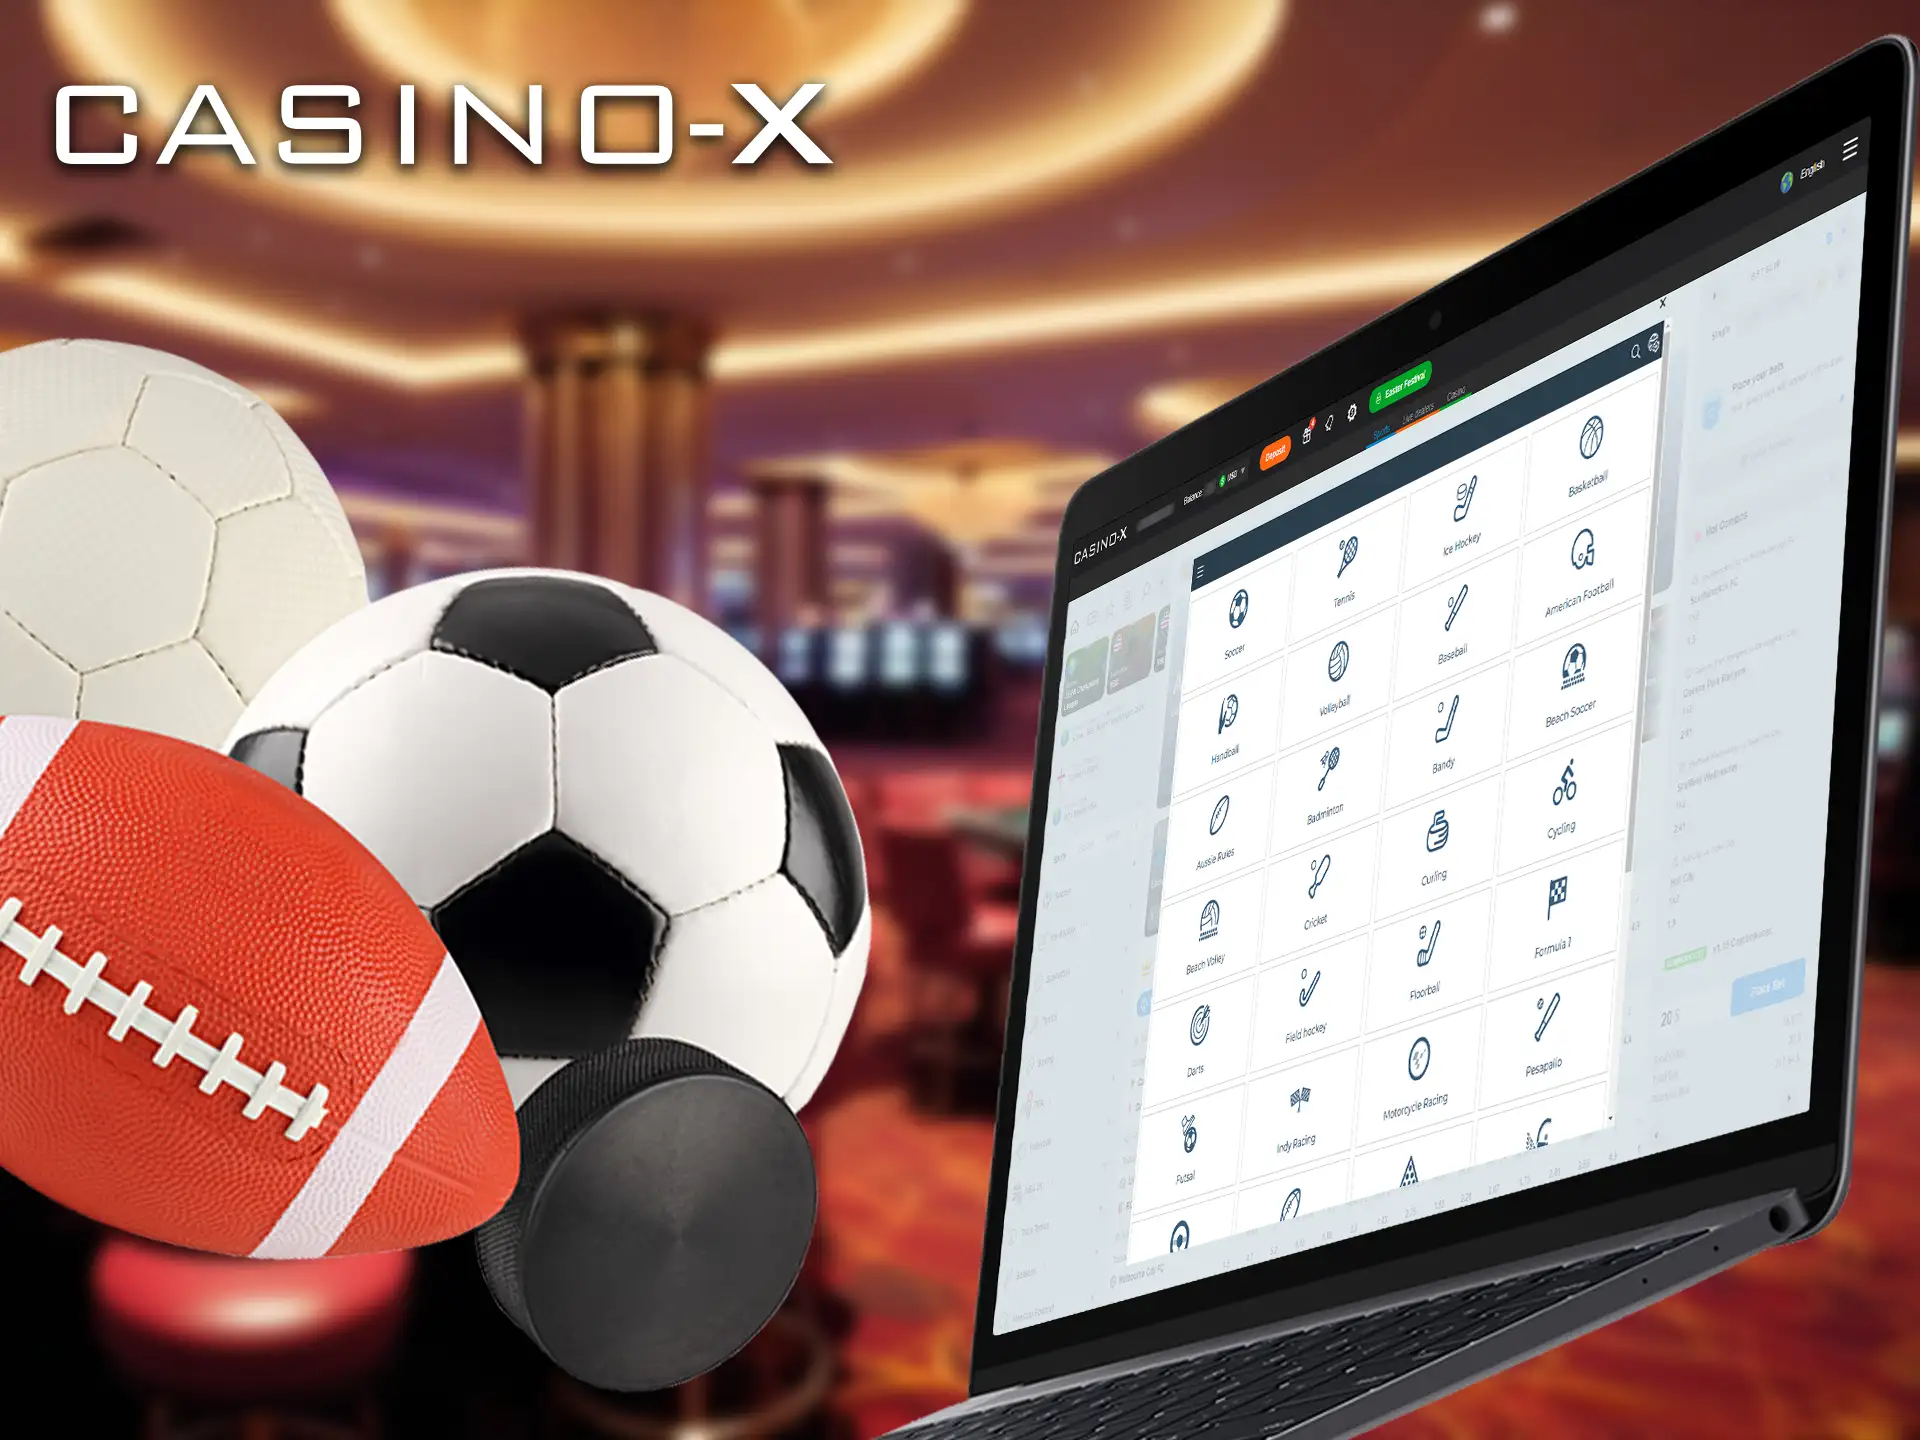 Casino-X has an extensive sports betting section that caters to a wide range of sports fans.